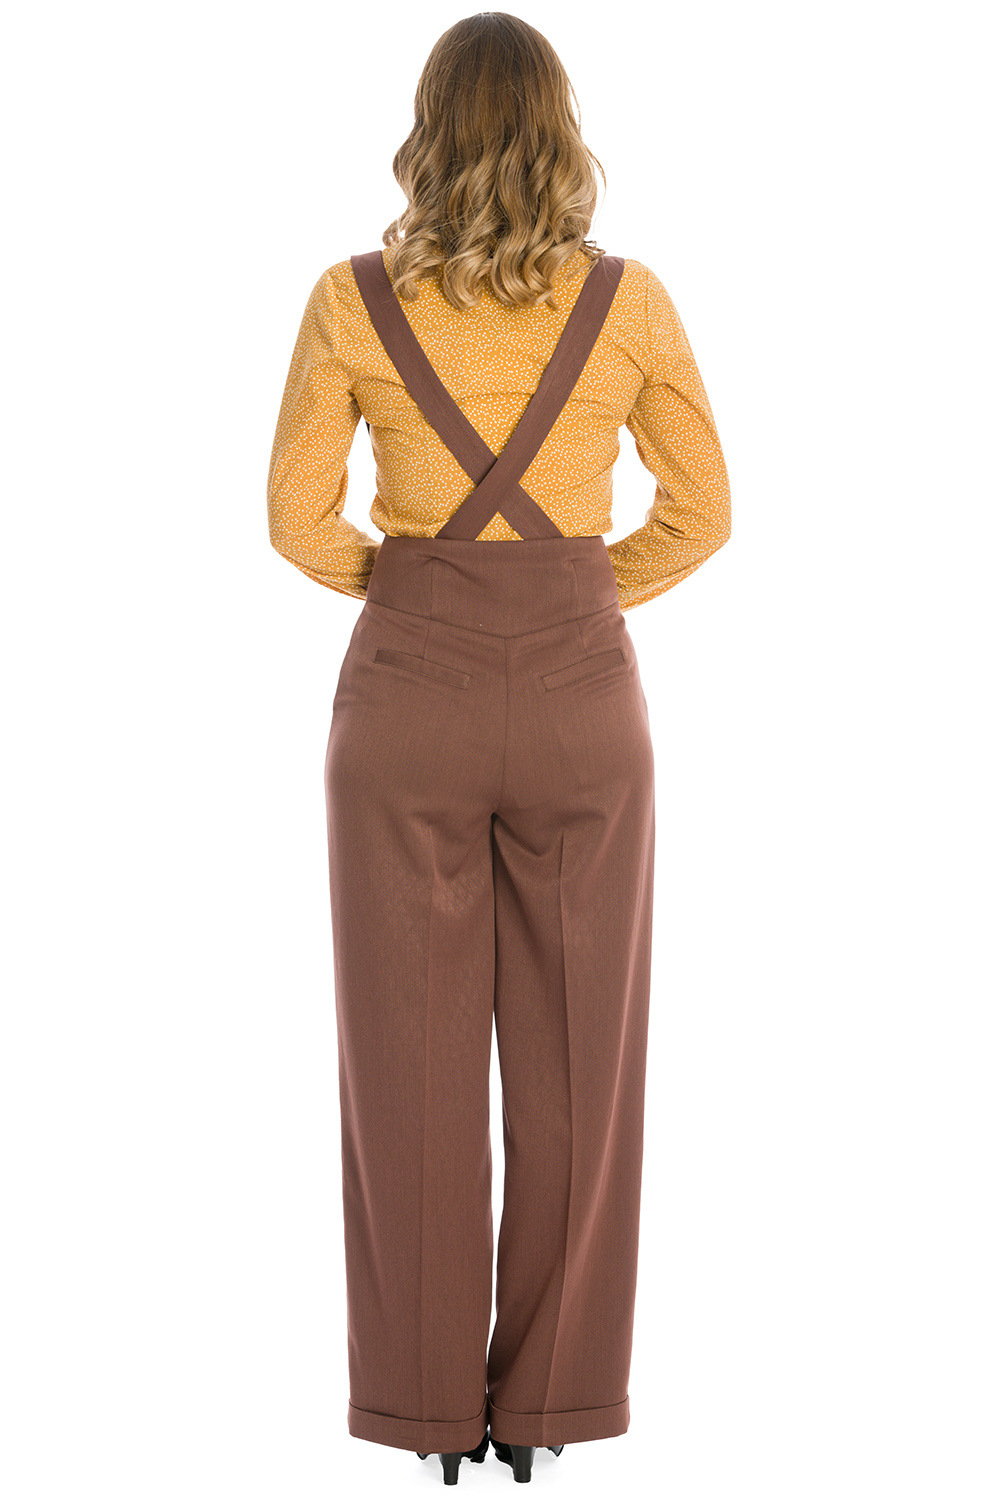 Banned Retro 40s Her Favourite Brown Trousers